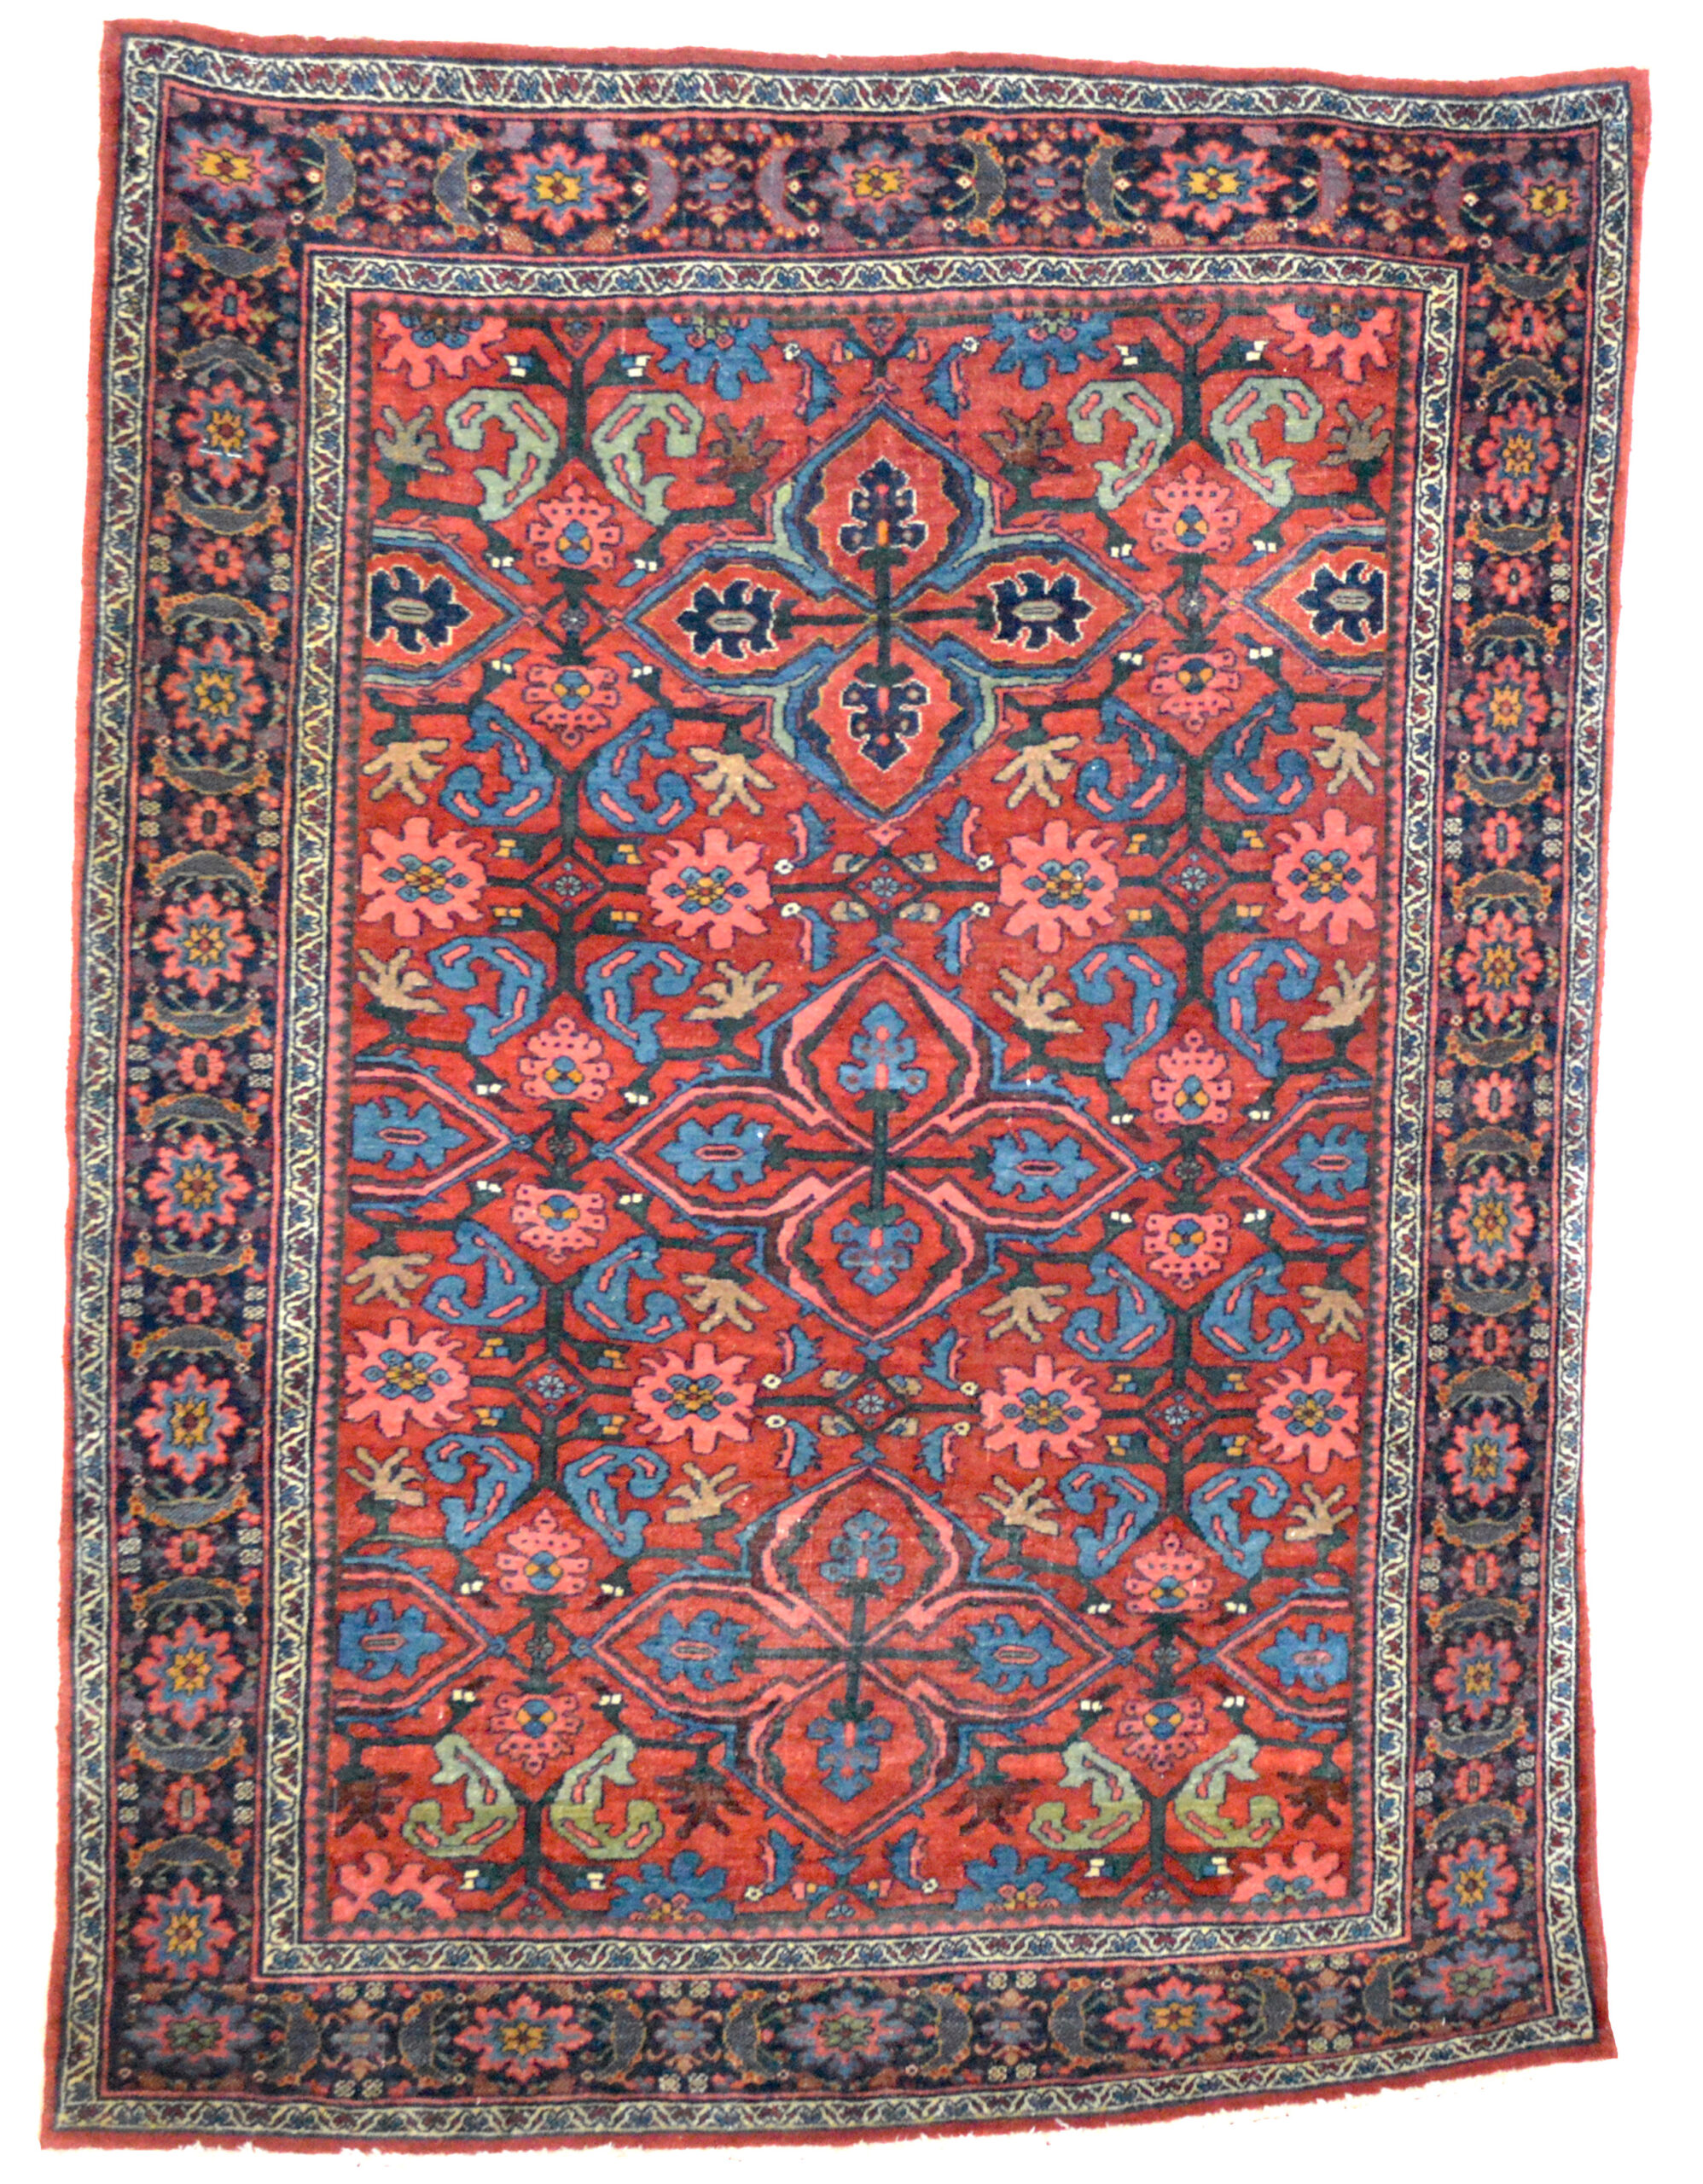 Antique Bidjar rug with Quatrefoil motifs on a red field, northwest Persia, circa 1900, Douglas Stock Gallery, antique Persian rugs Boston,MA area, antique rugs South Natick, Wellesley MA area